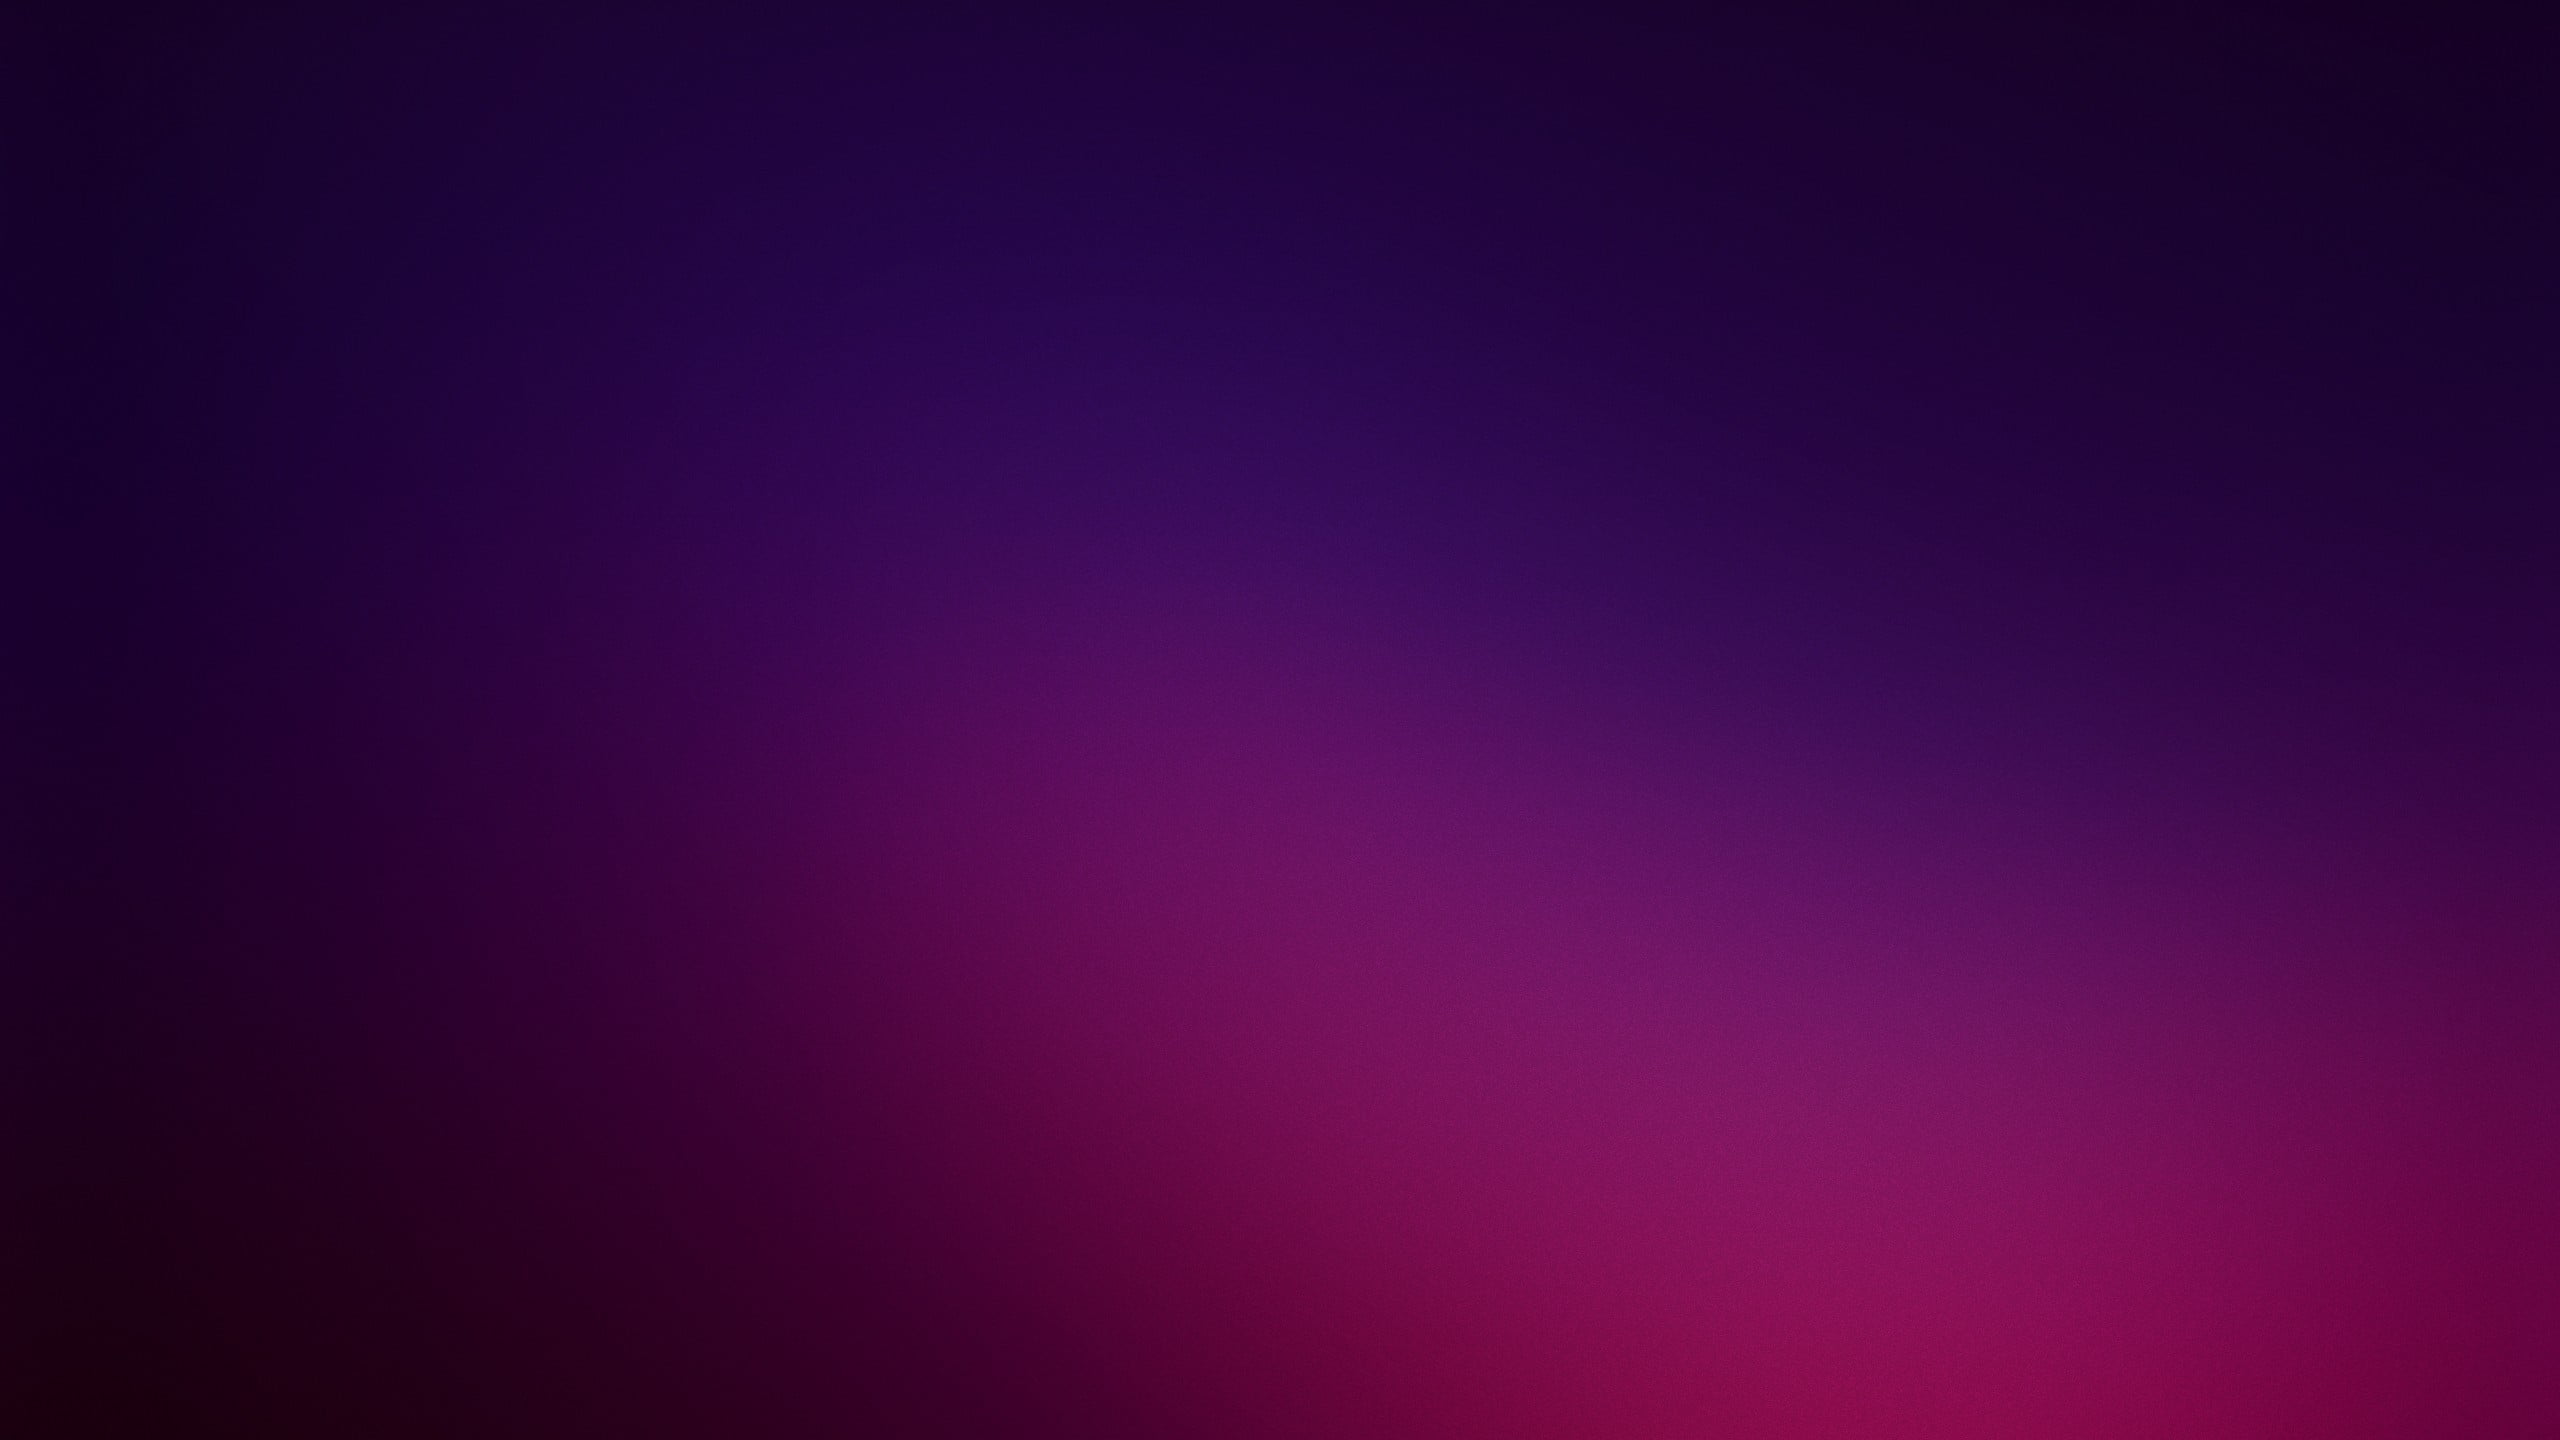 simple, gradient, minimalism, backgrounds, abstract, pattern